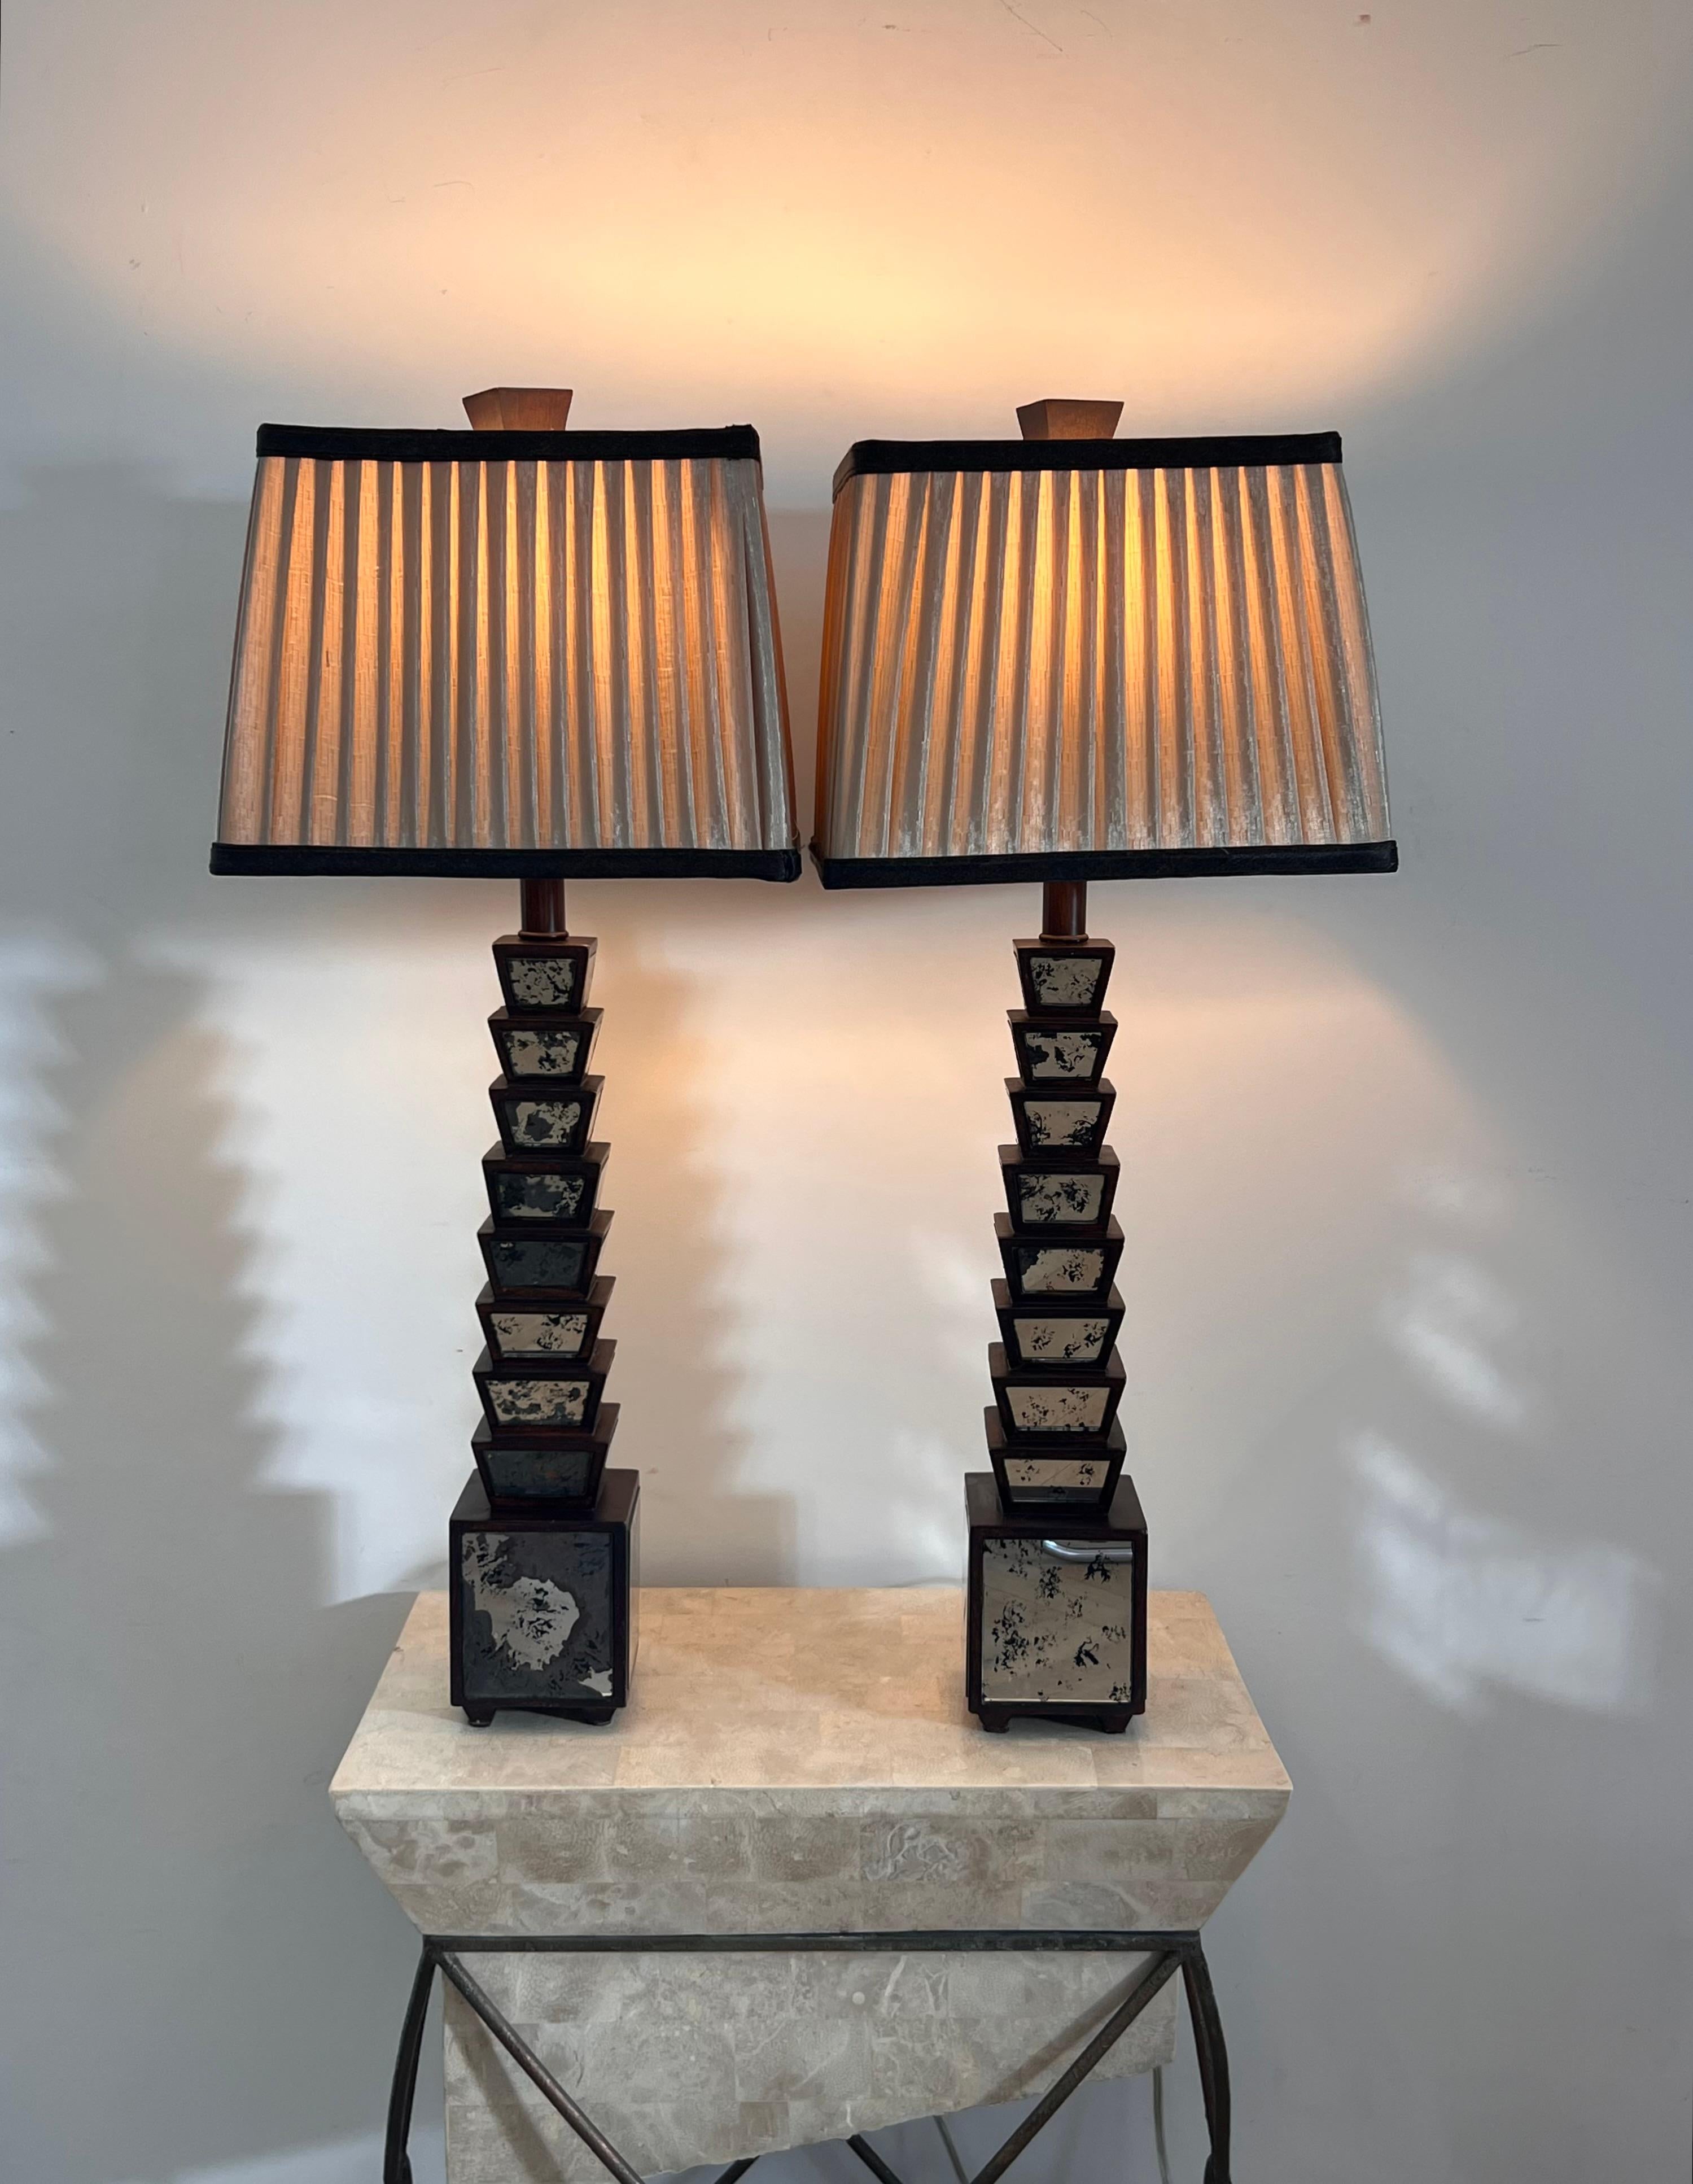 A pair of antique table lamps, circa early 20th century. Featuring graduated wood bases punctuated by patina’d mirror, topped by pleated raw silk shades, this stunning pair is at once elegant and statement, with a foot firmly in the geometrics of